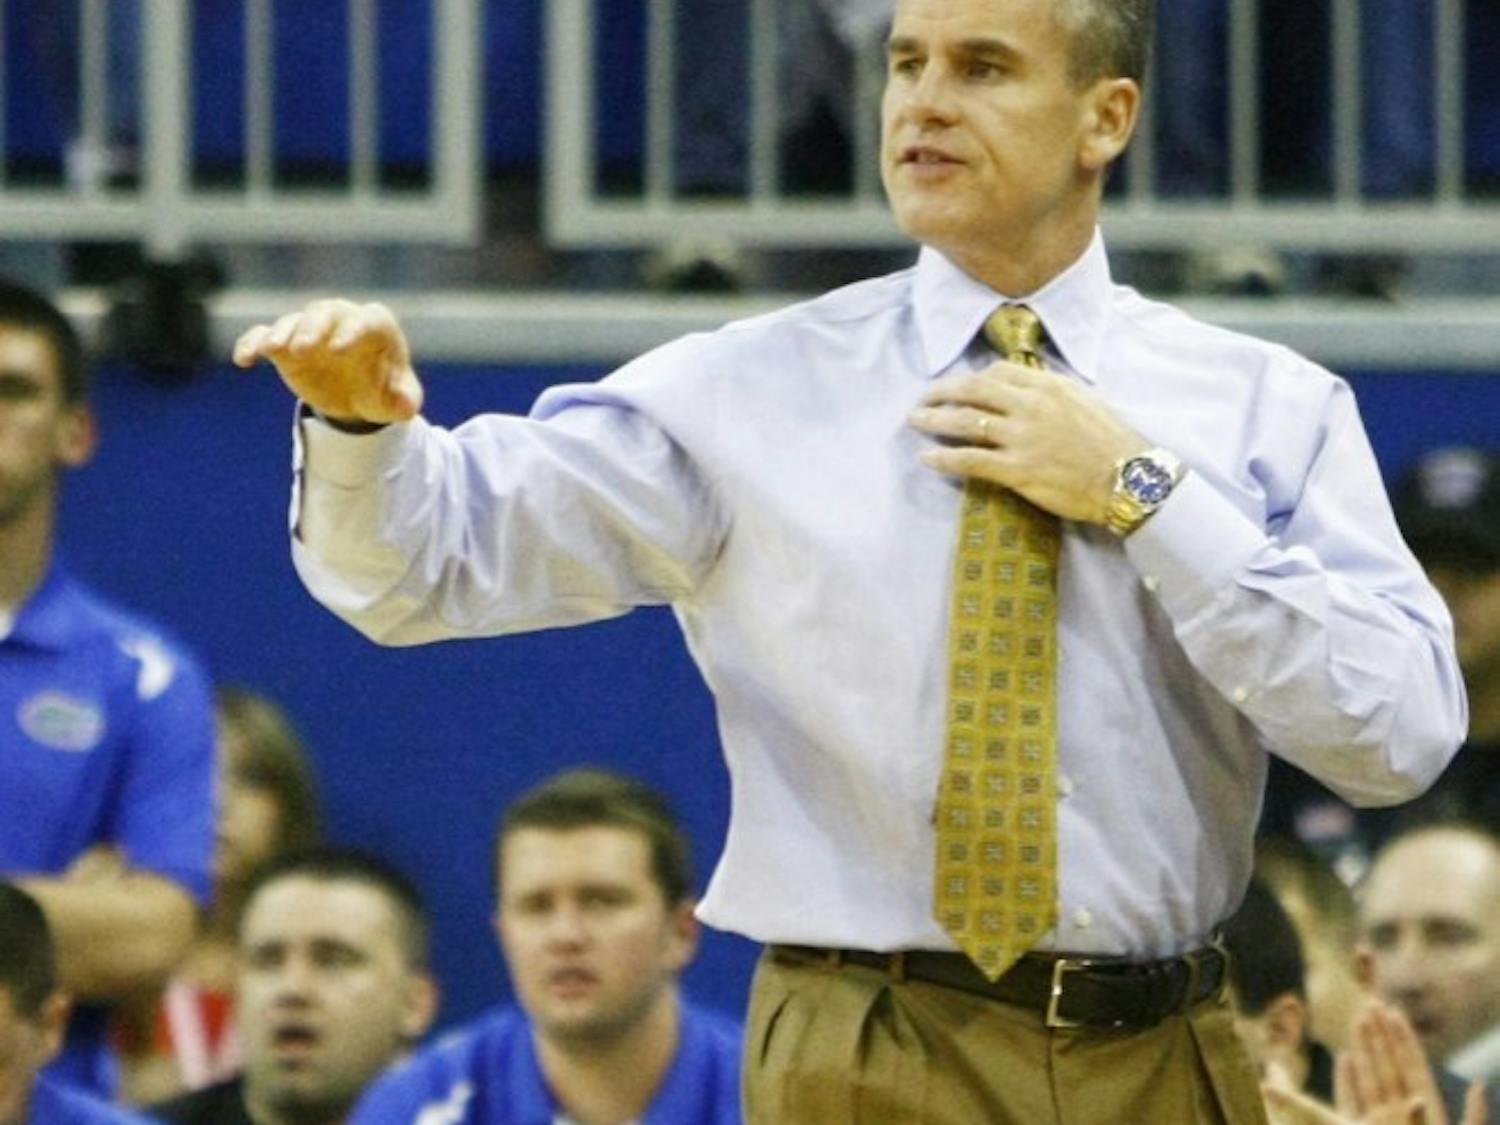 Coach Billy Donovan signals to his team during Florida’s 101-71 exhibition win against Nebraska-Kearney on Nov. 1 in the O’Connell Center.